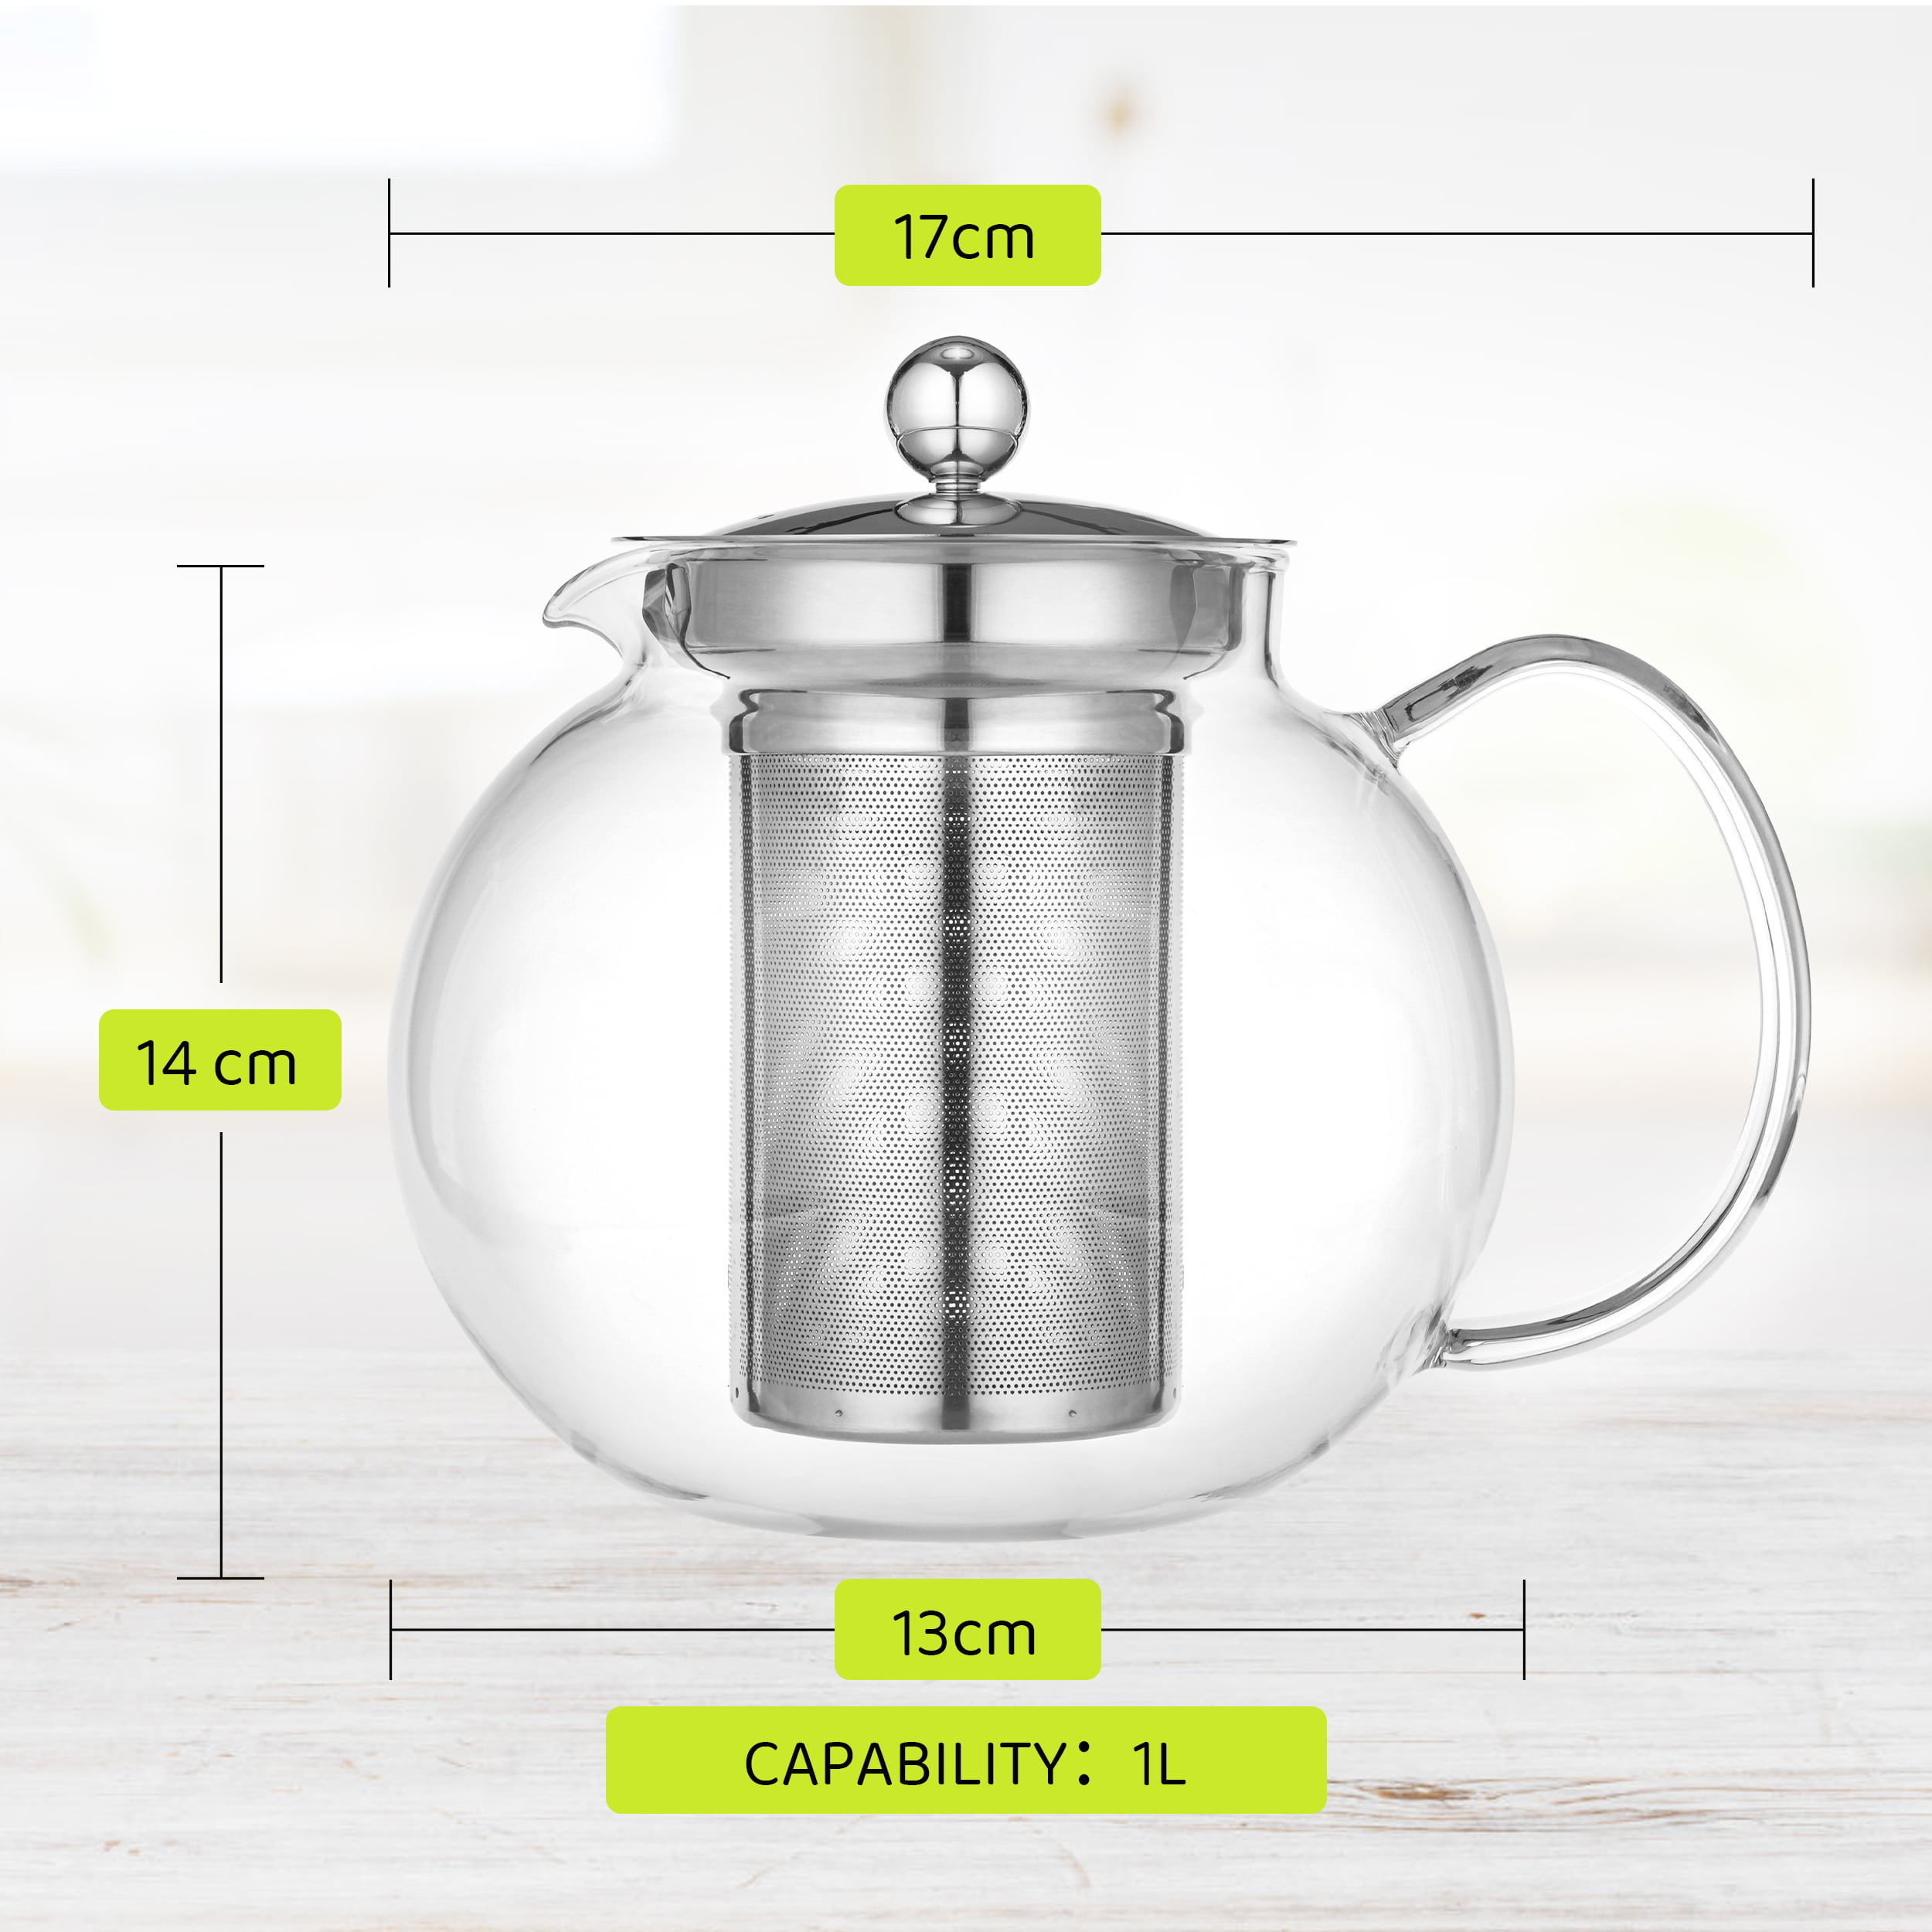 BIOCOR Clear Teapot 2 in 1 with Rotatory Infuser and Citrus Juicer, Clear  Tea Pot With Infuser, Tea Pots For Loose Tea, Small Teapot with Stainless